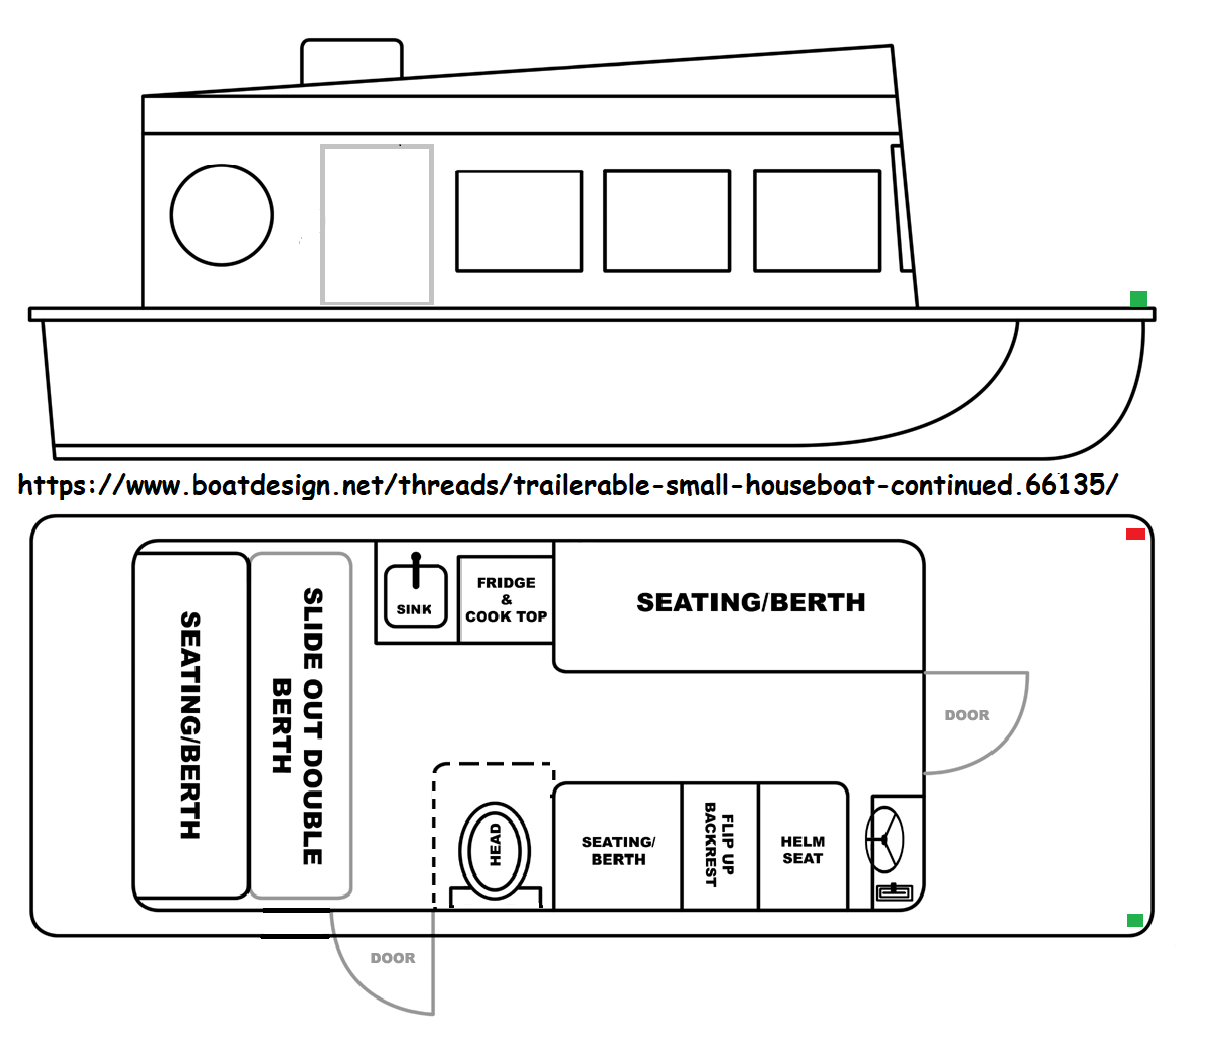 trailerable-small-houseboat-continued.66135.png